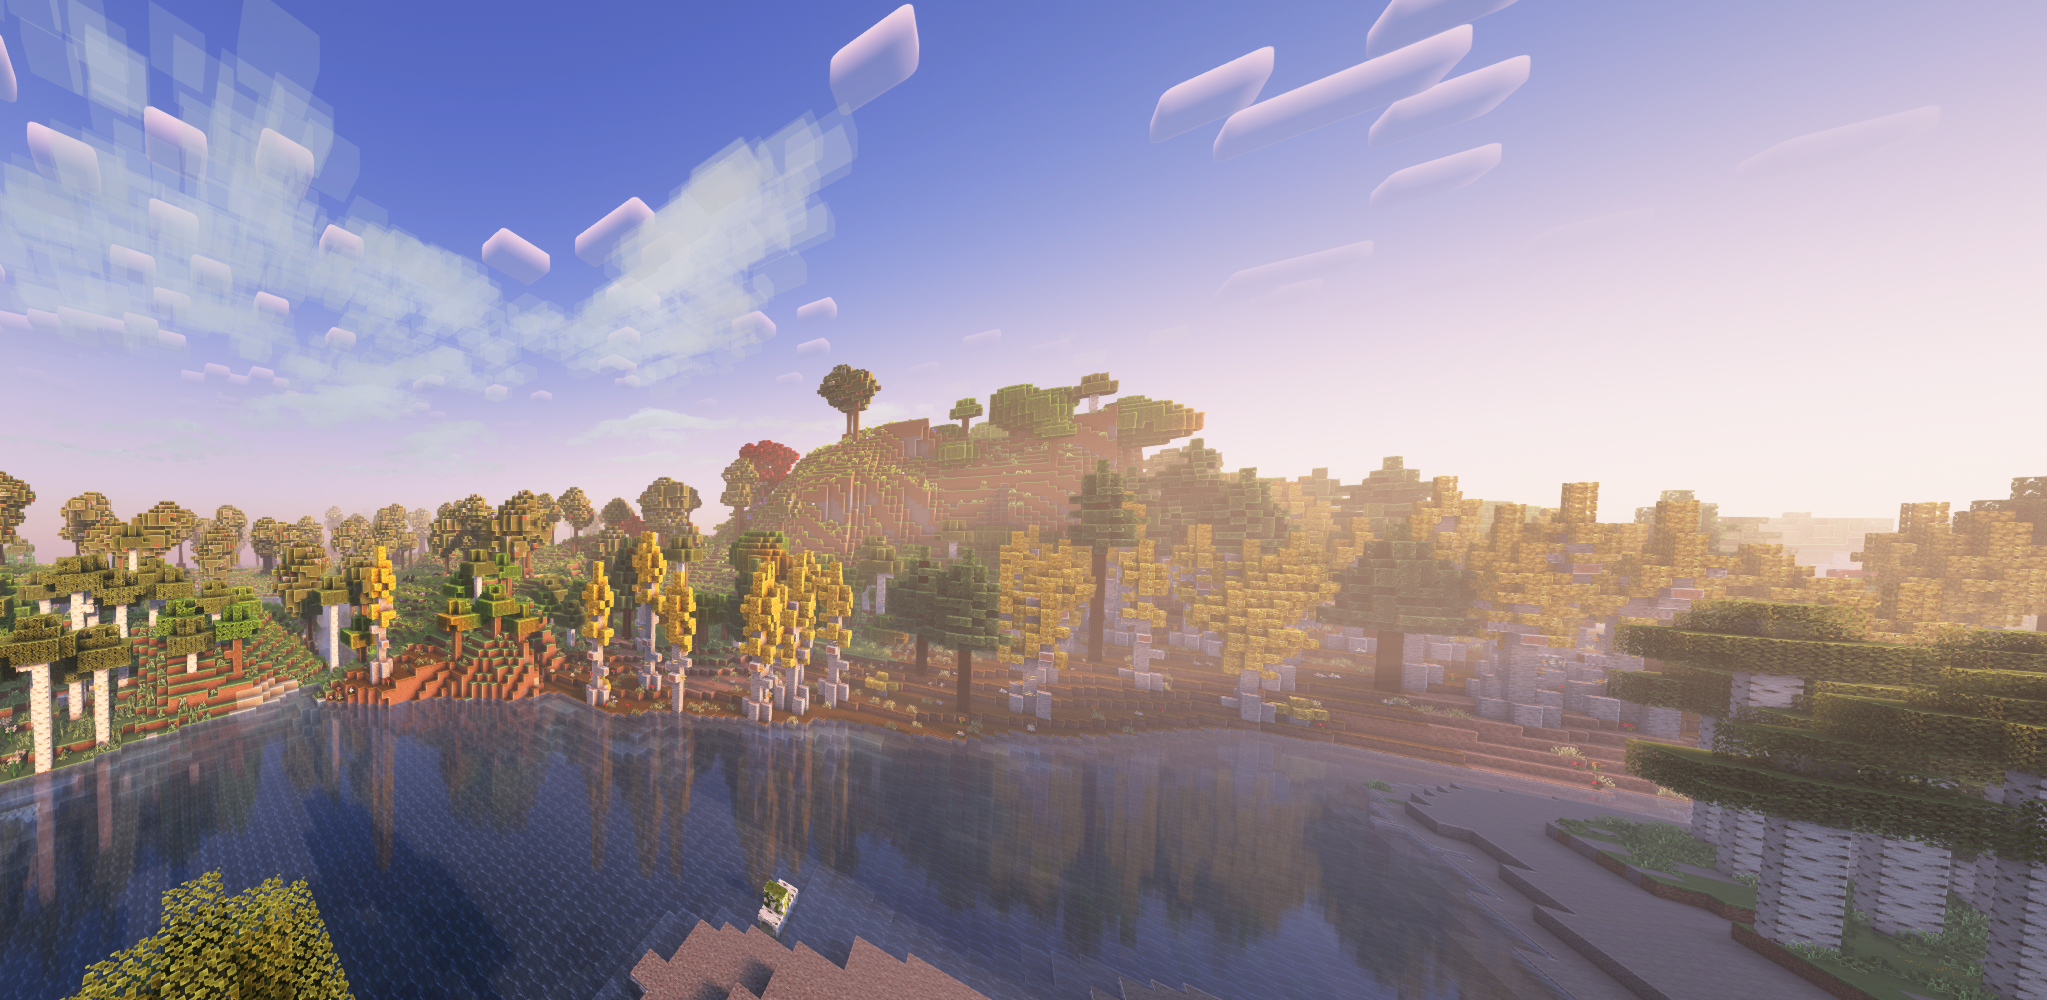 The Minecraft Overworld with this mod